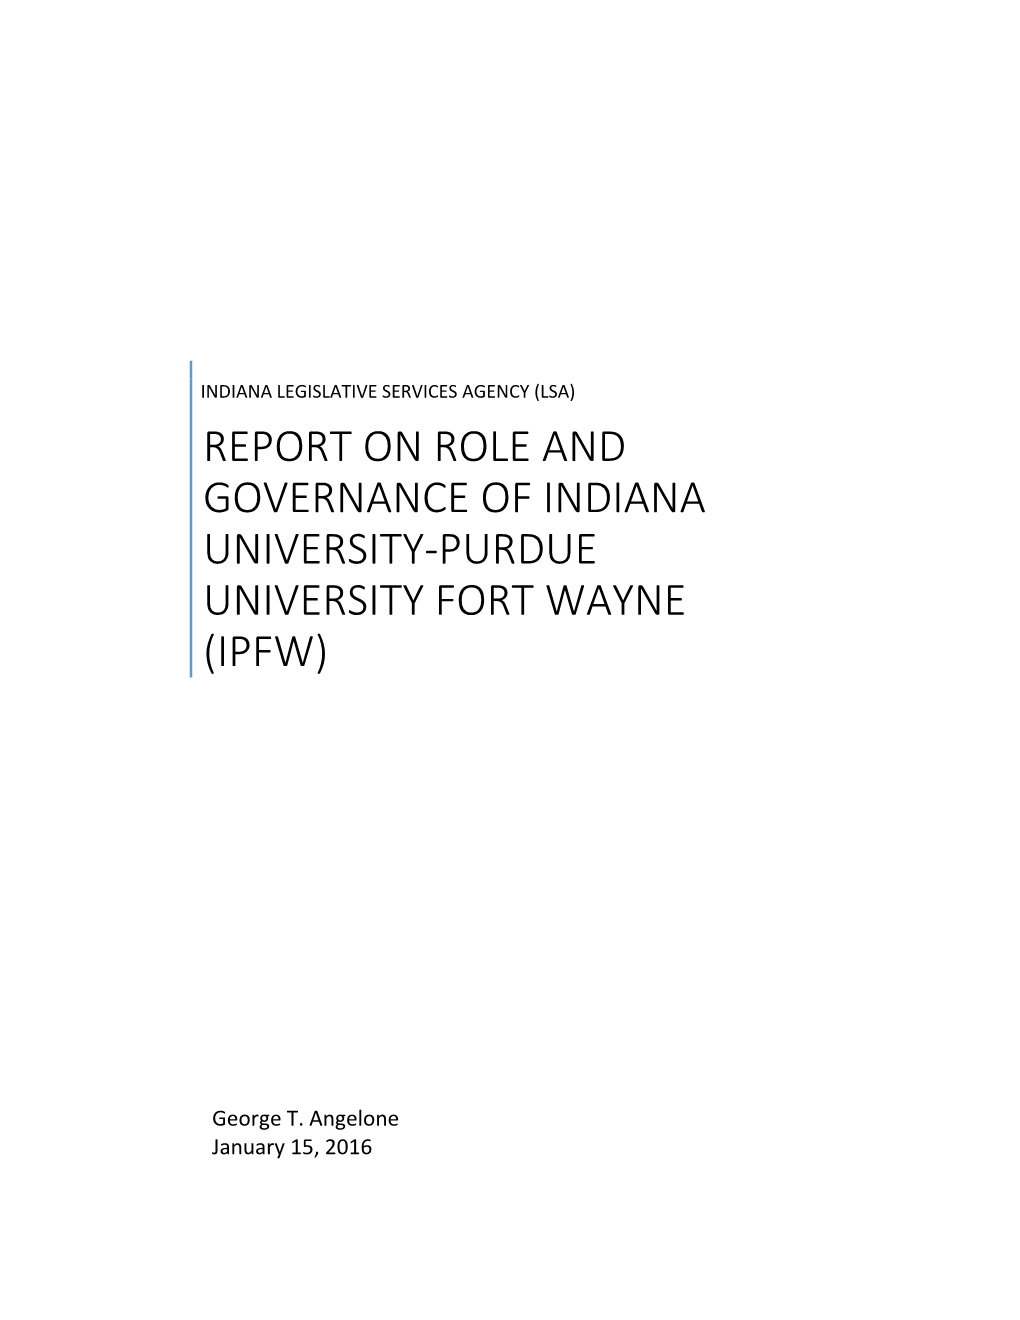 Report on Role and Governance of Indiana University-Purdue University Fort Wayne (Ipfw)